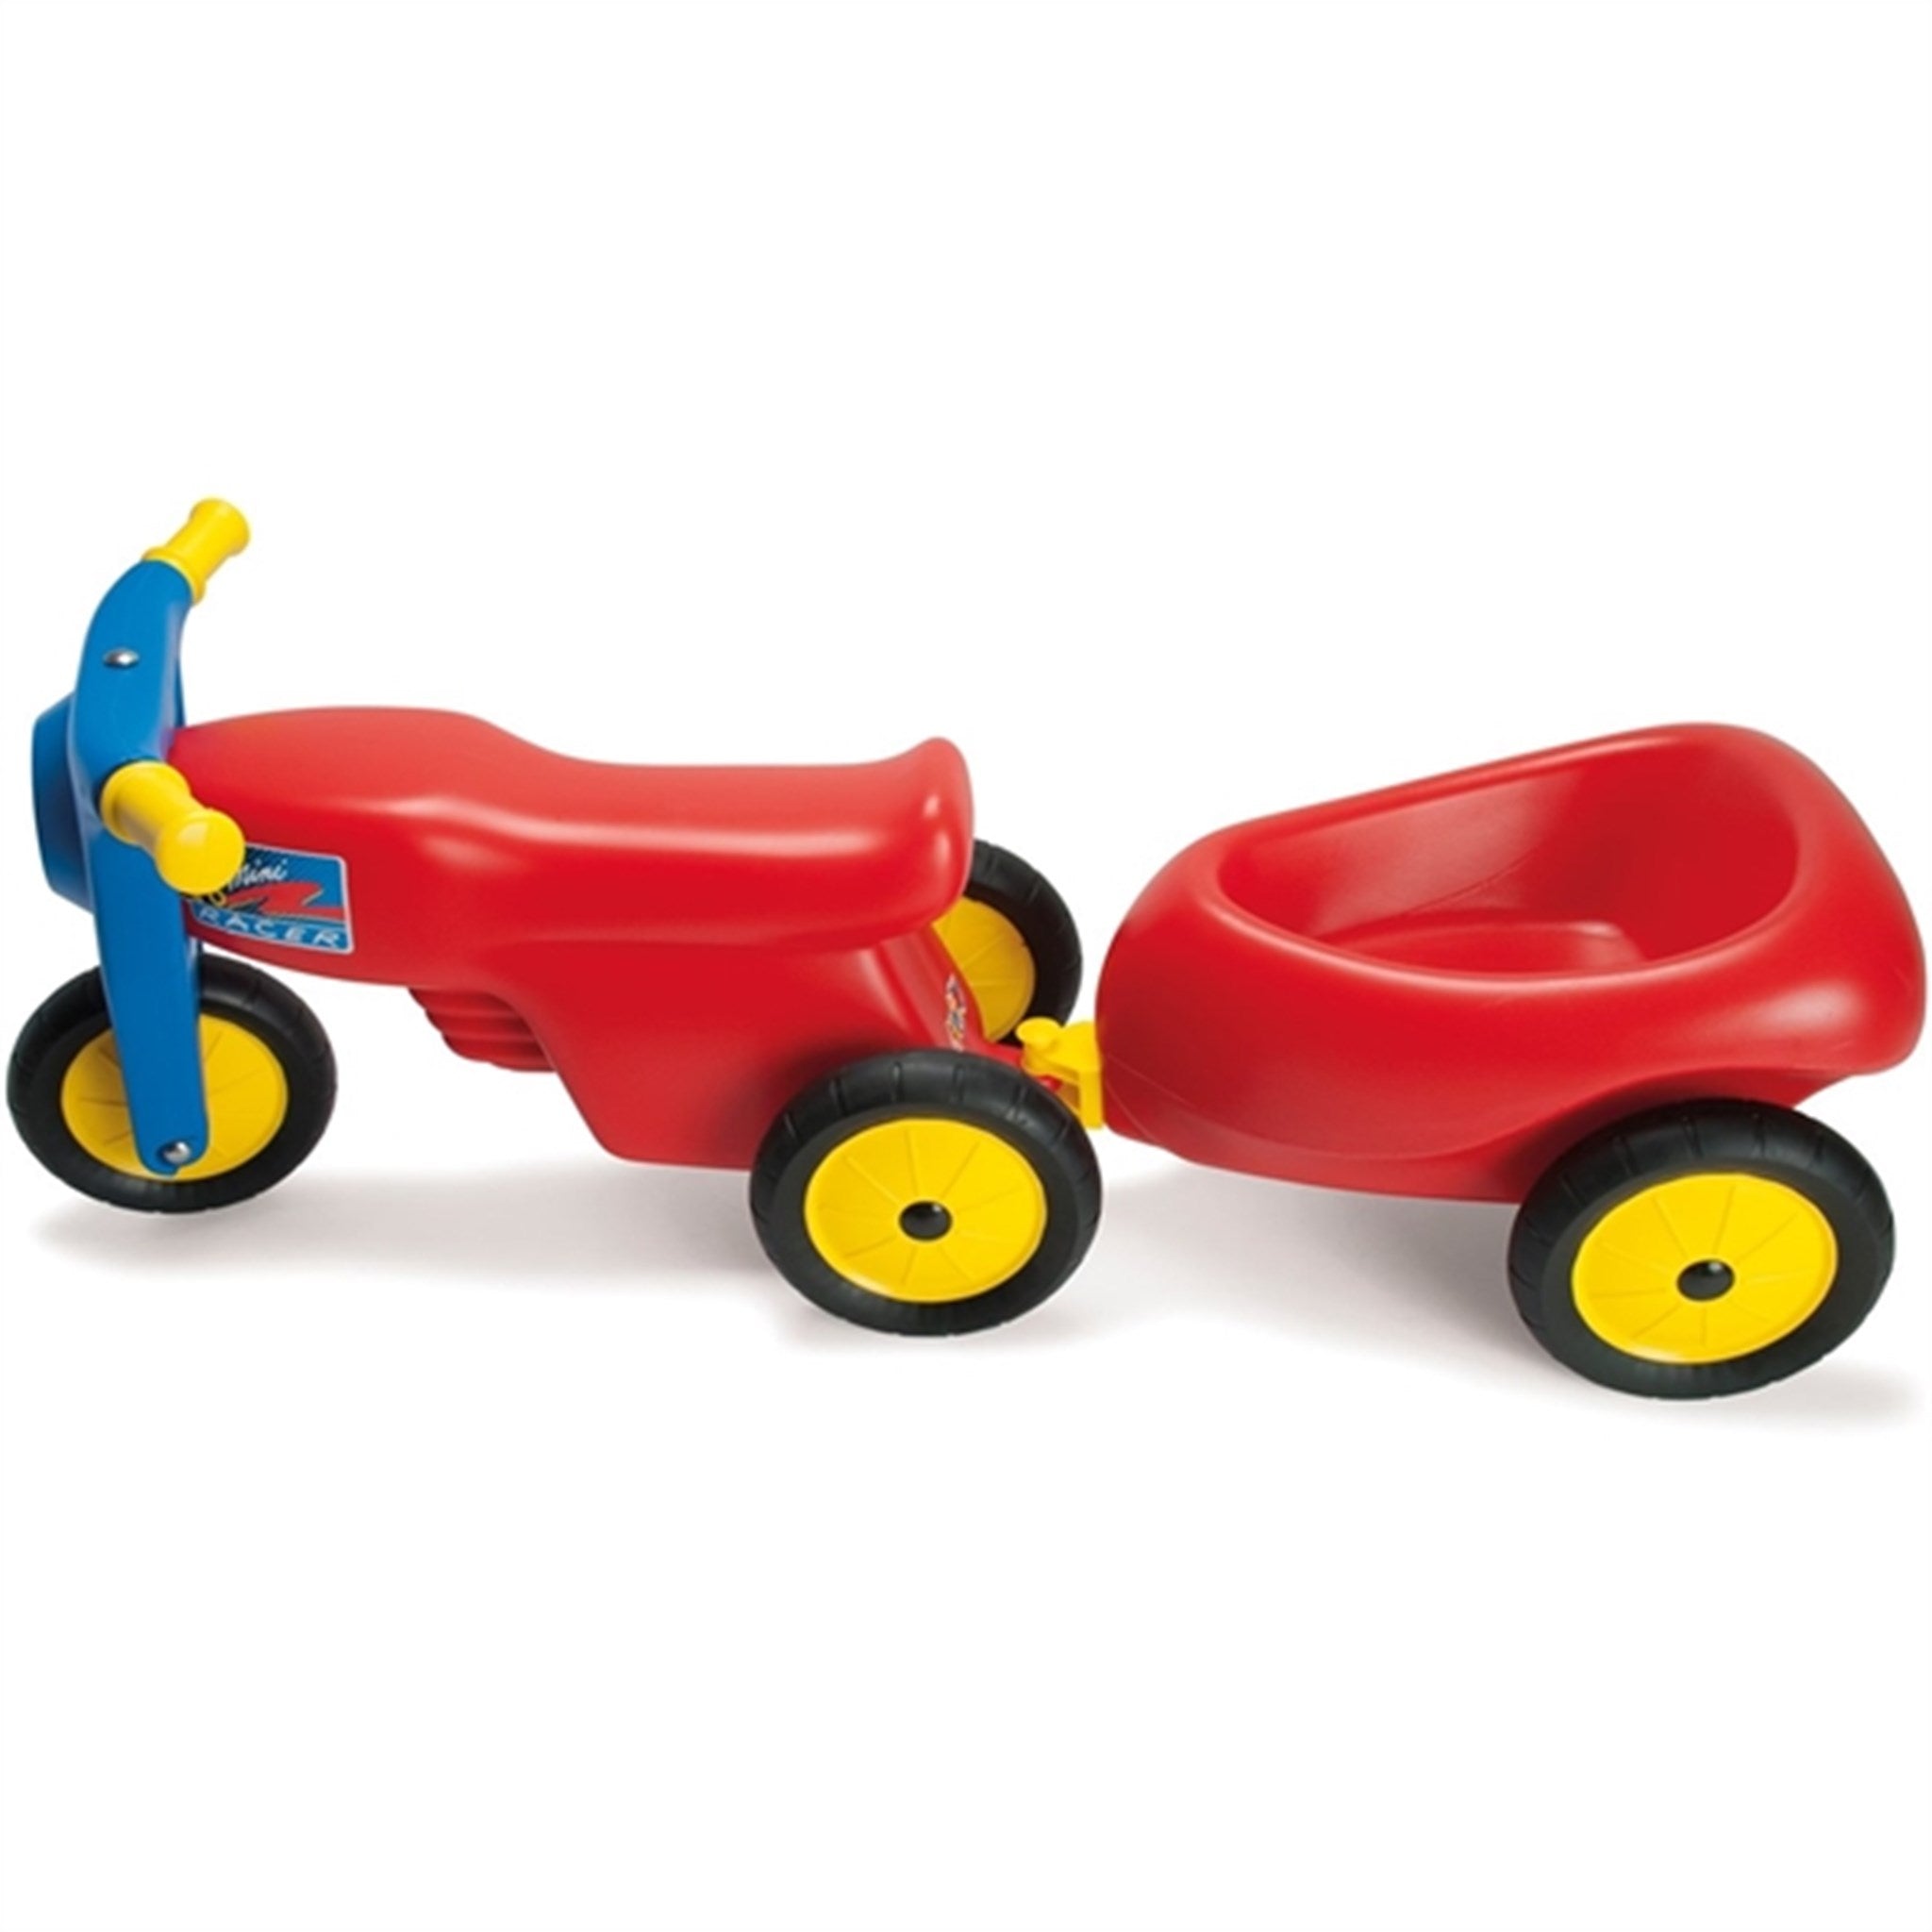 Dantoy Dt Trailer With Rubber Wheels 4